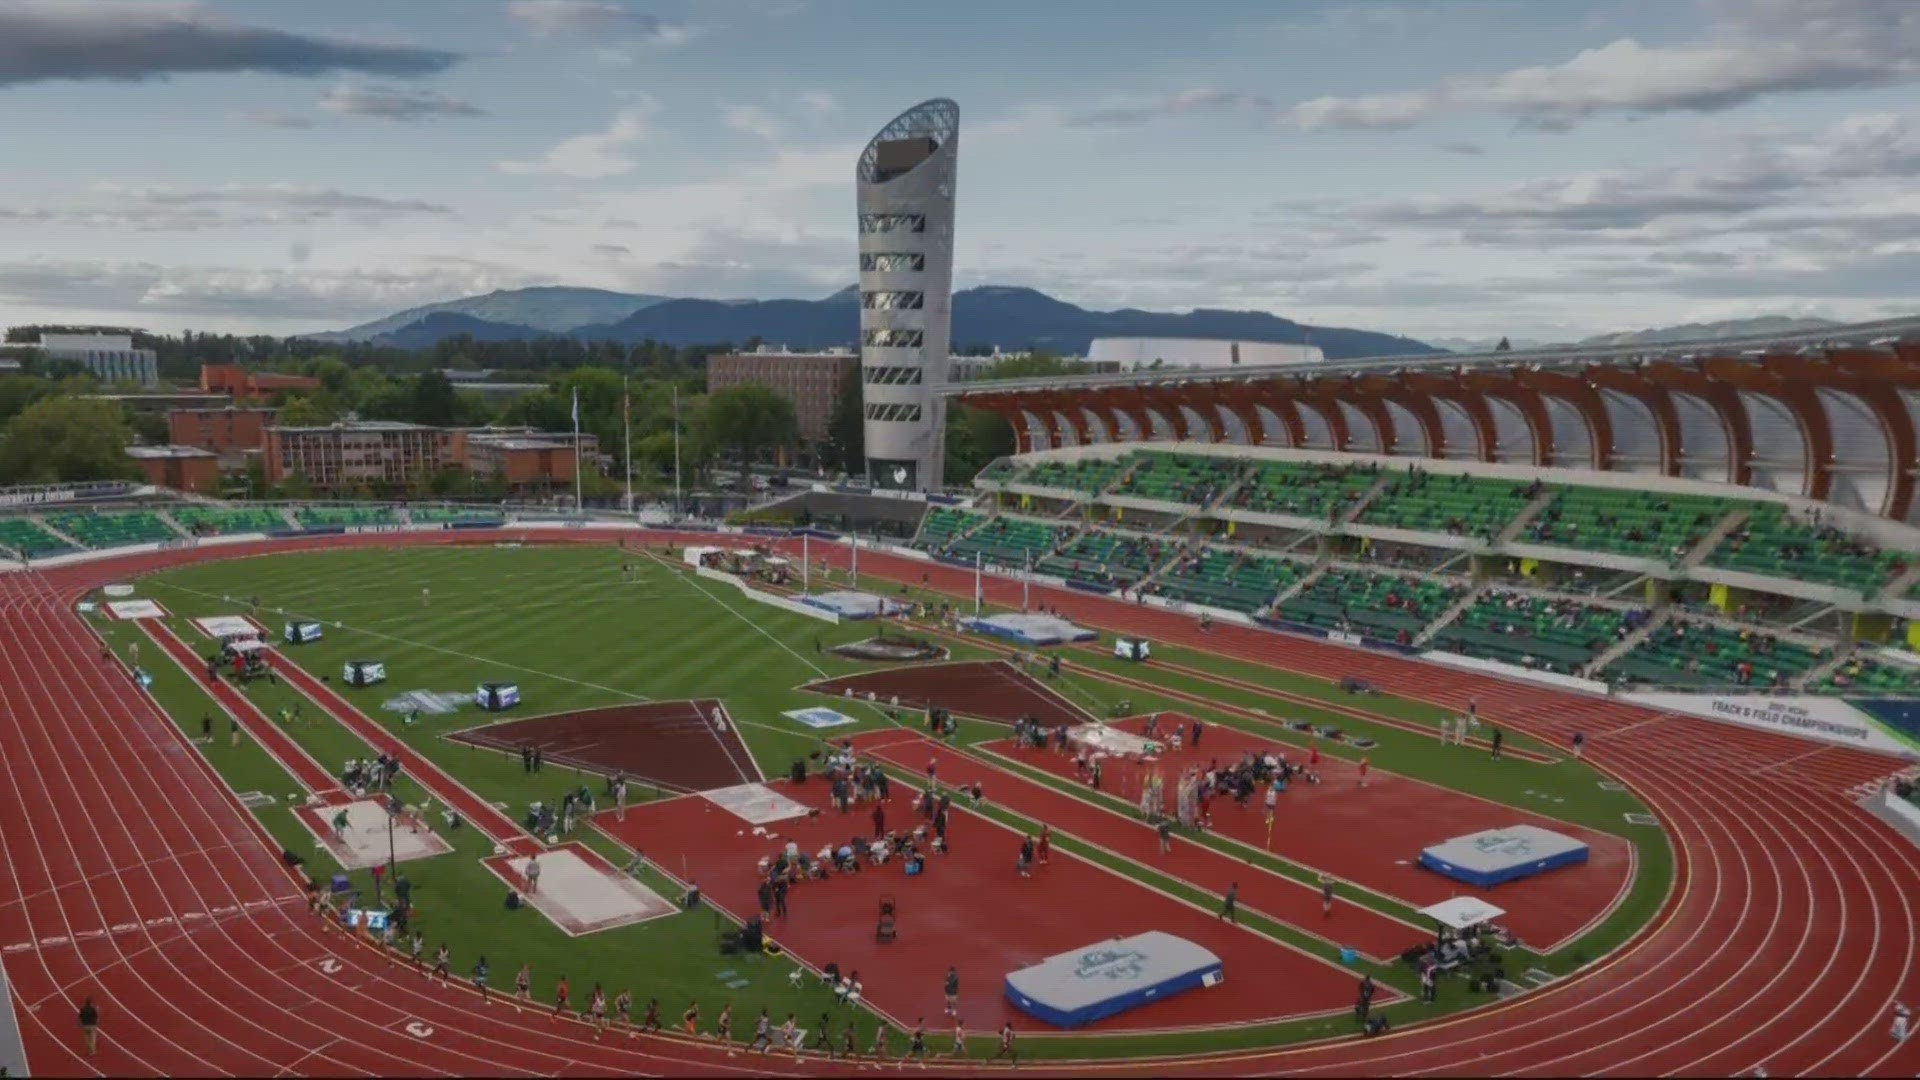 Single-day tickets go on sale Thursday for the U.S. Track and Field Olympic Trials in Eugene.